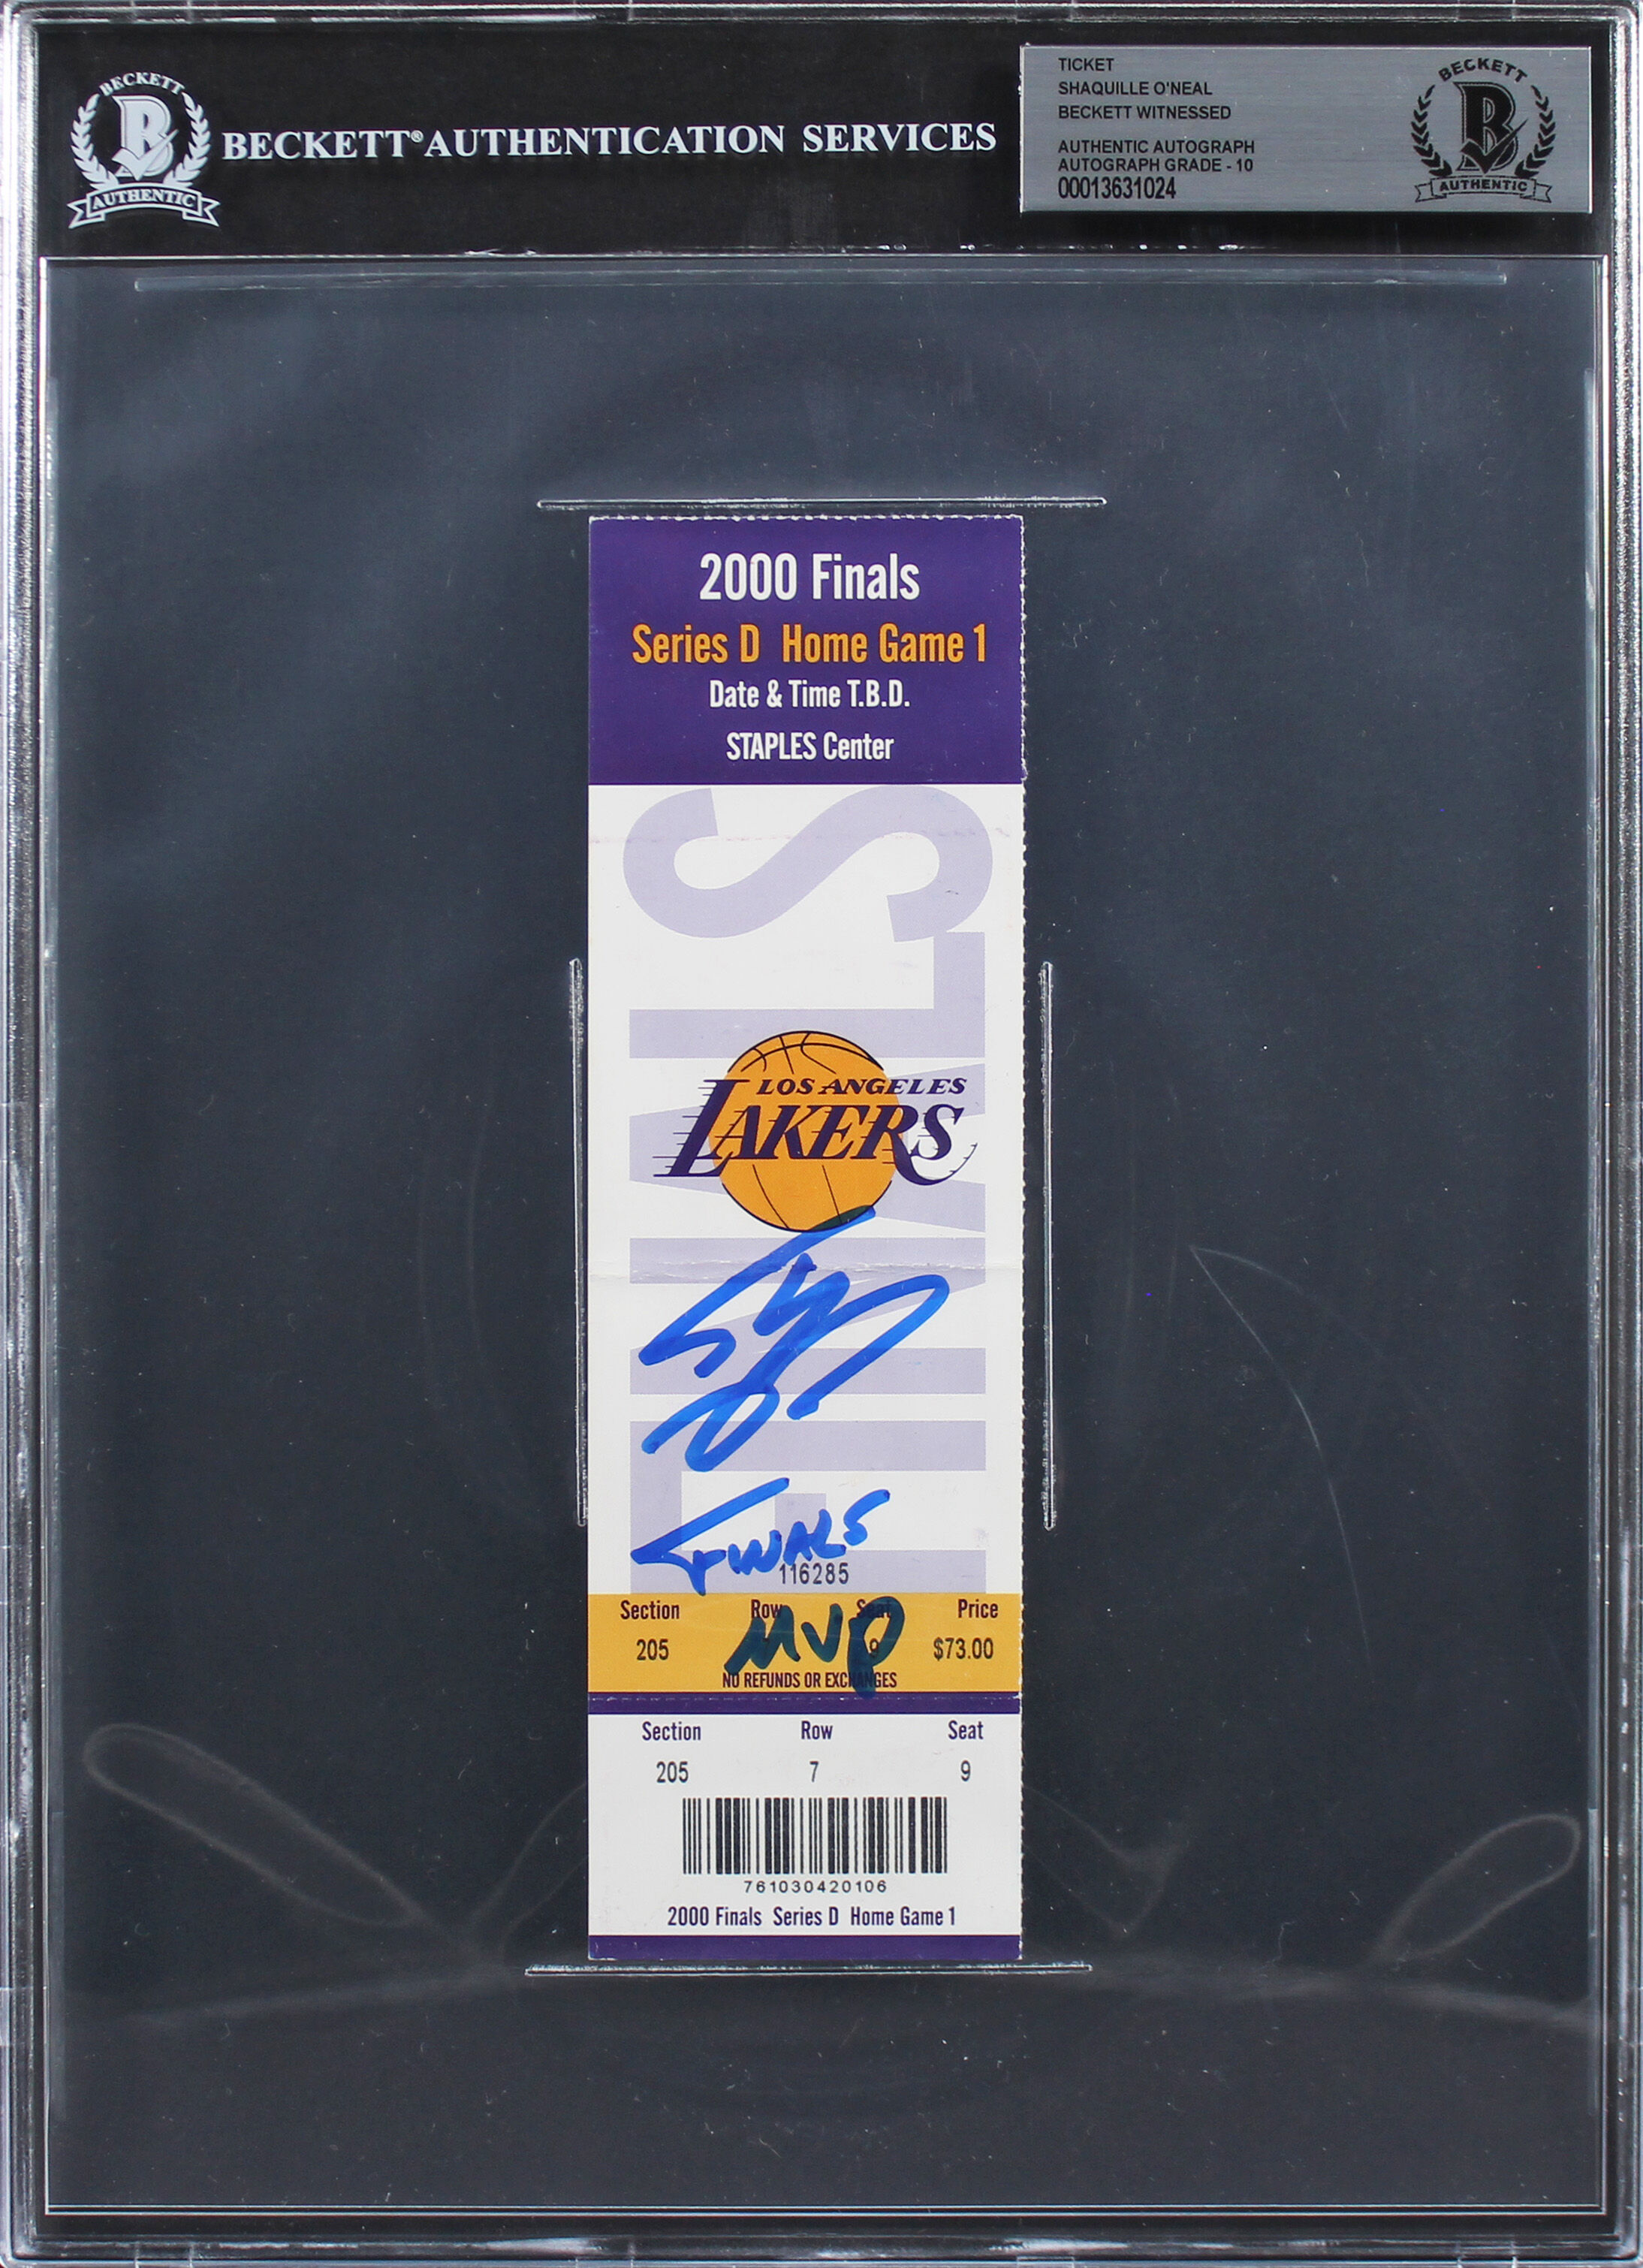 Press Pass Collectibles Shaquille O'Neal Finals MVP Signed 2000 Finals GM 1 Ticket Stub Auto 10 BAS Slab